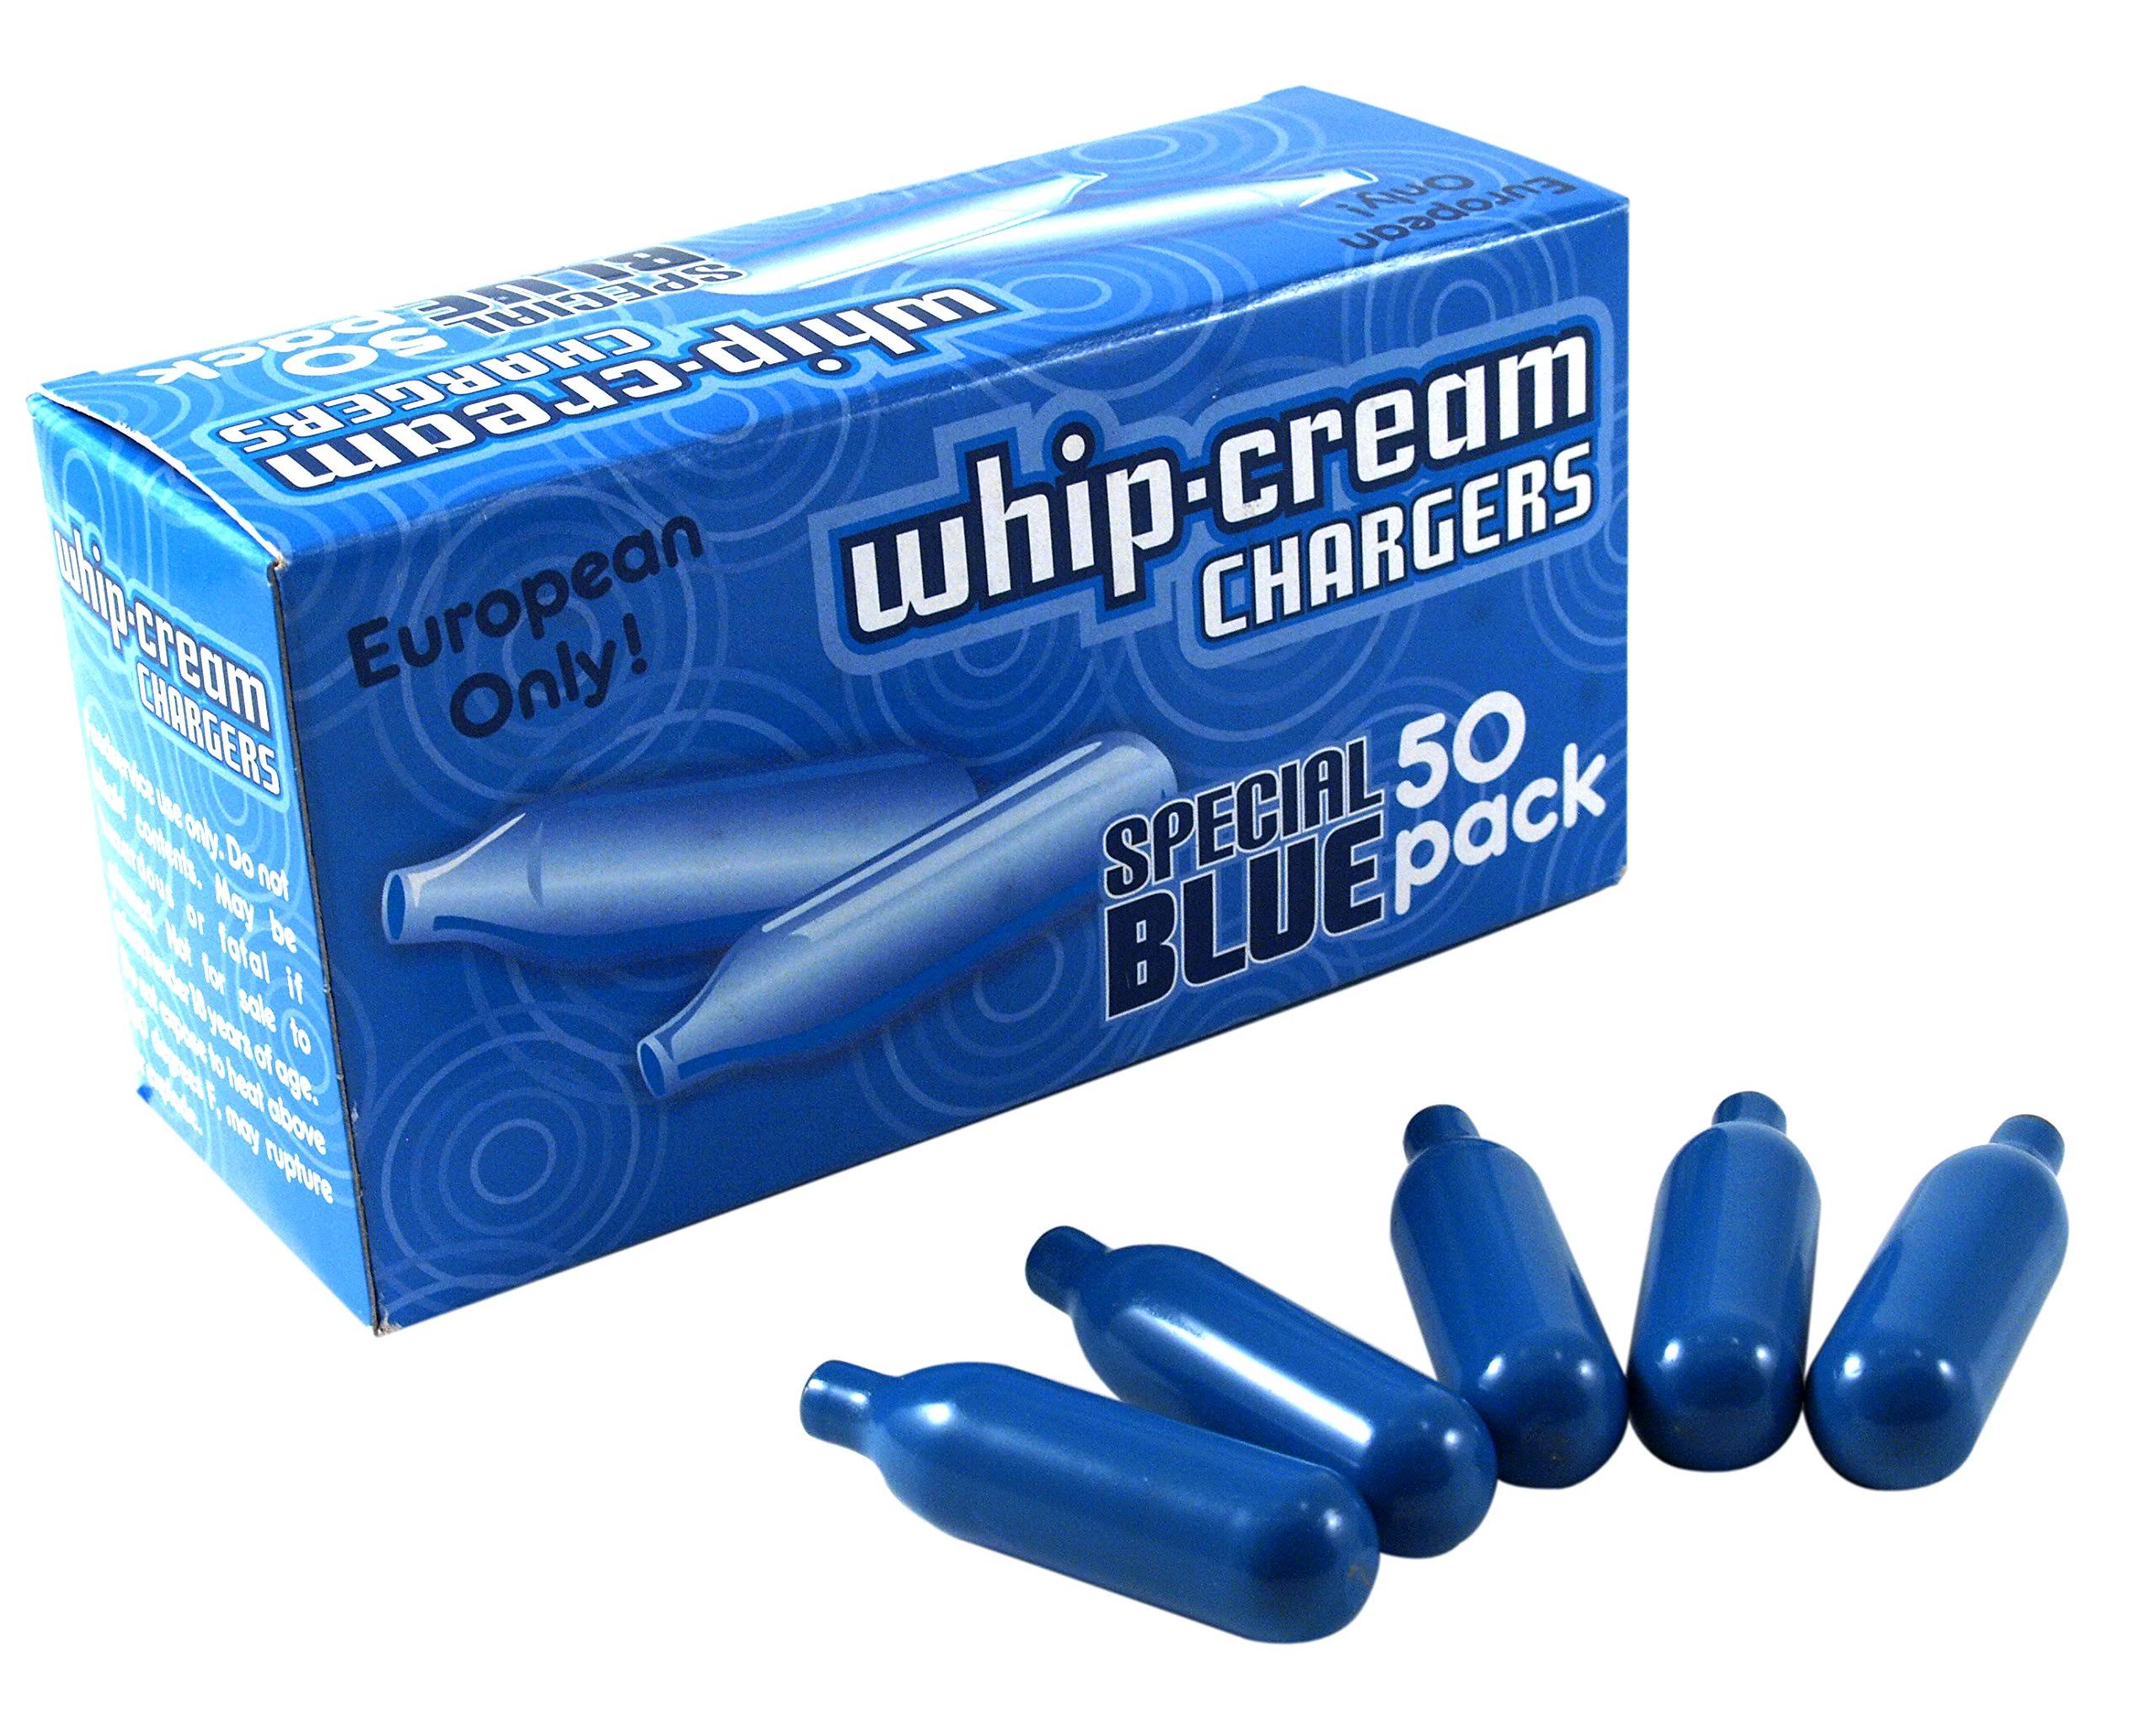 Special Blue N20 Whipped Cream Chargers - 600 Count